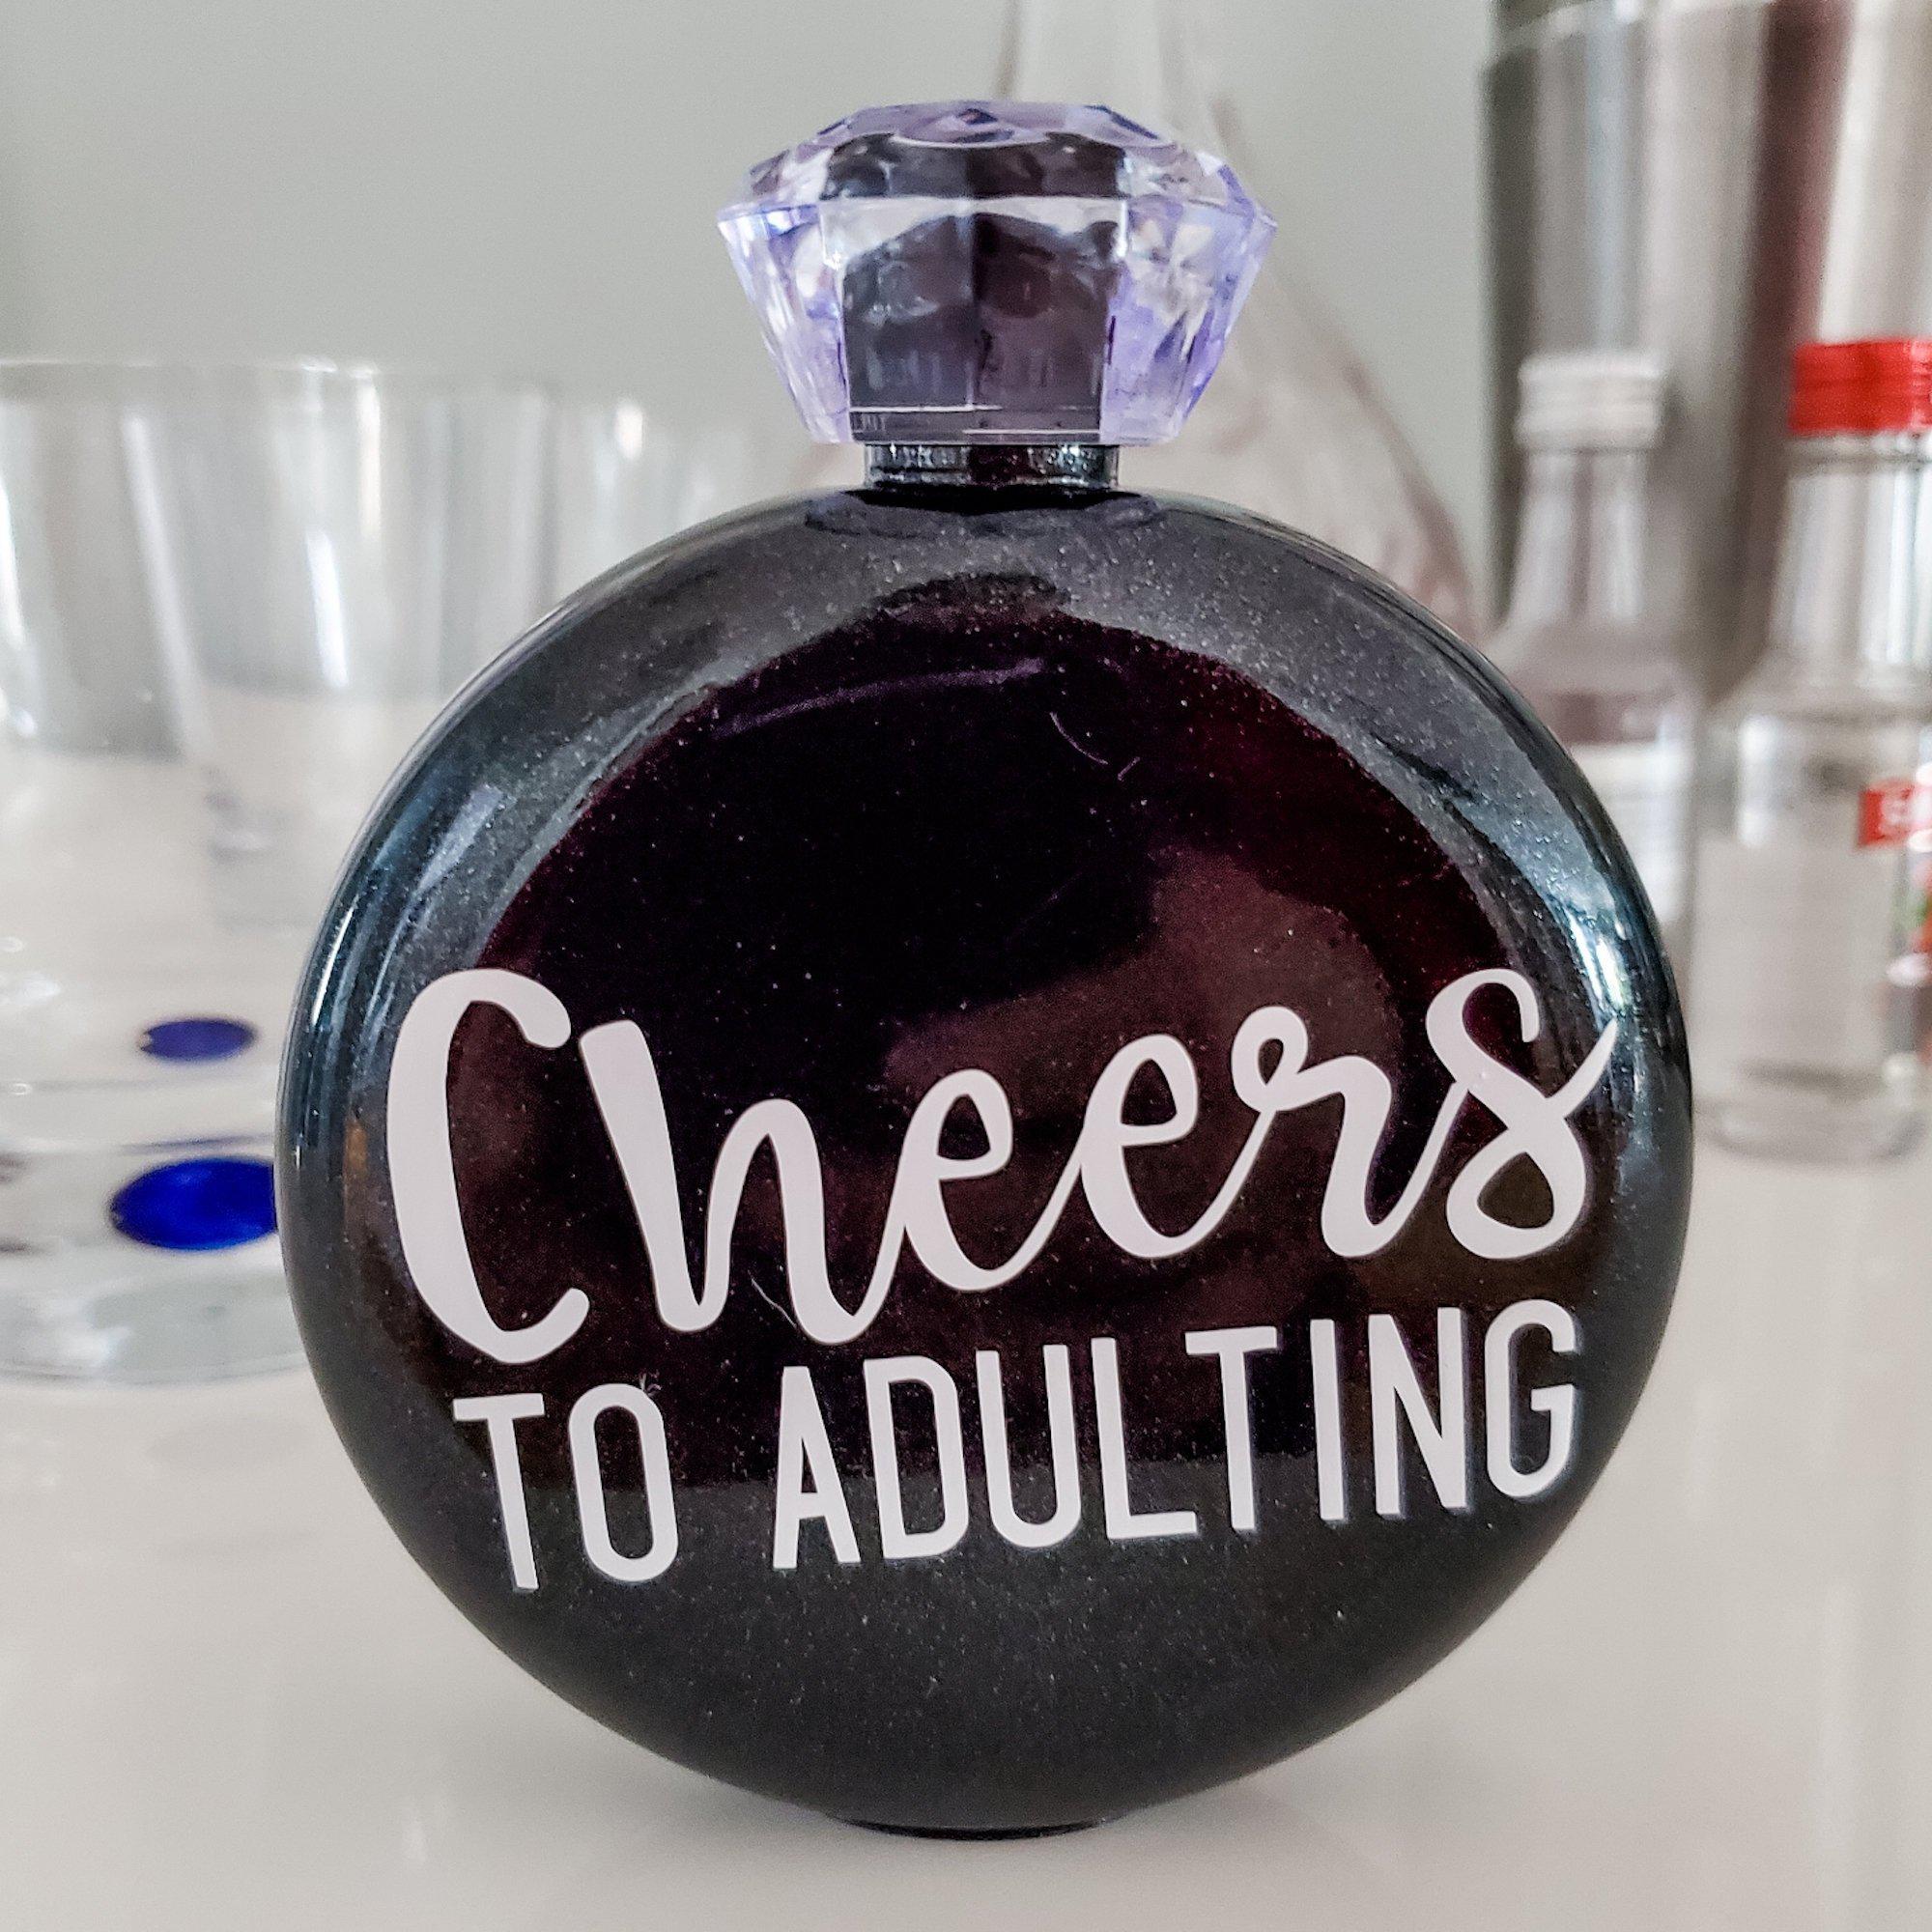 CHEERS TO ADULTING Jewel Flask Salt and Sparkle